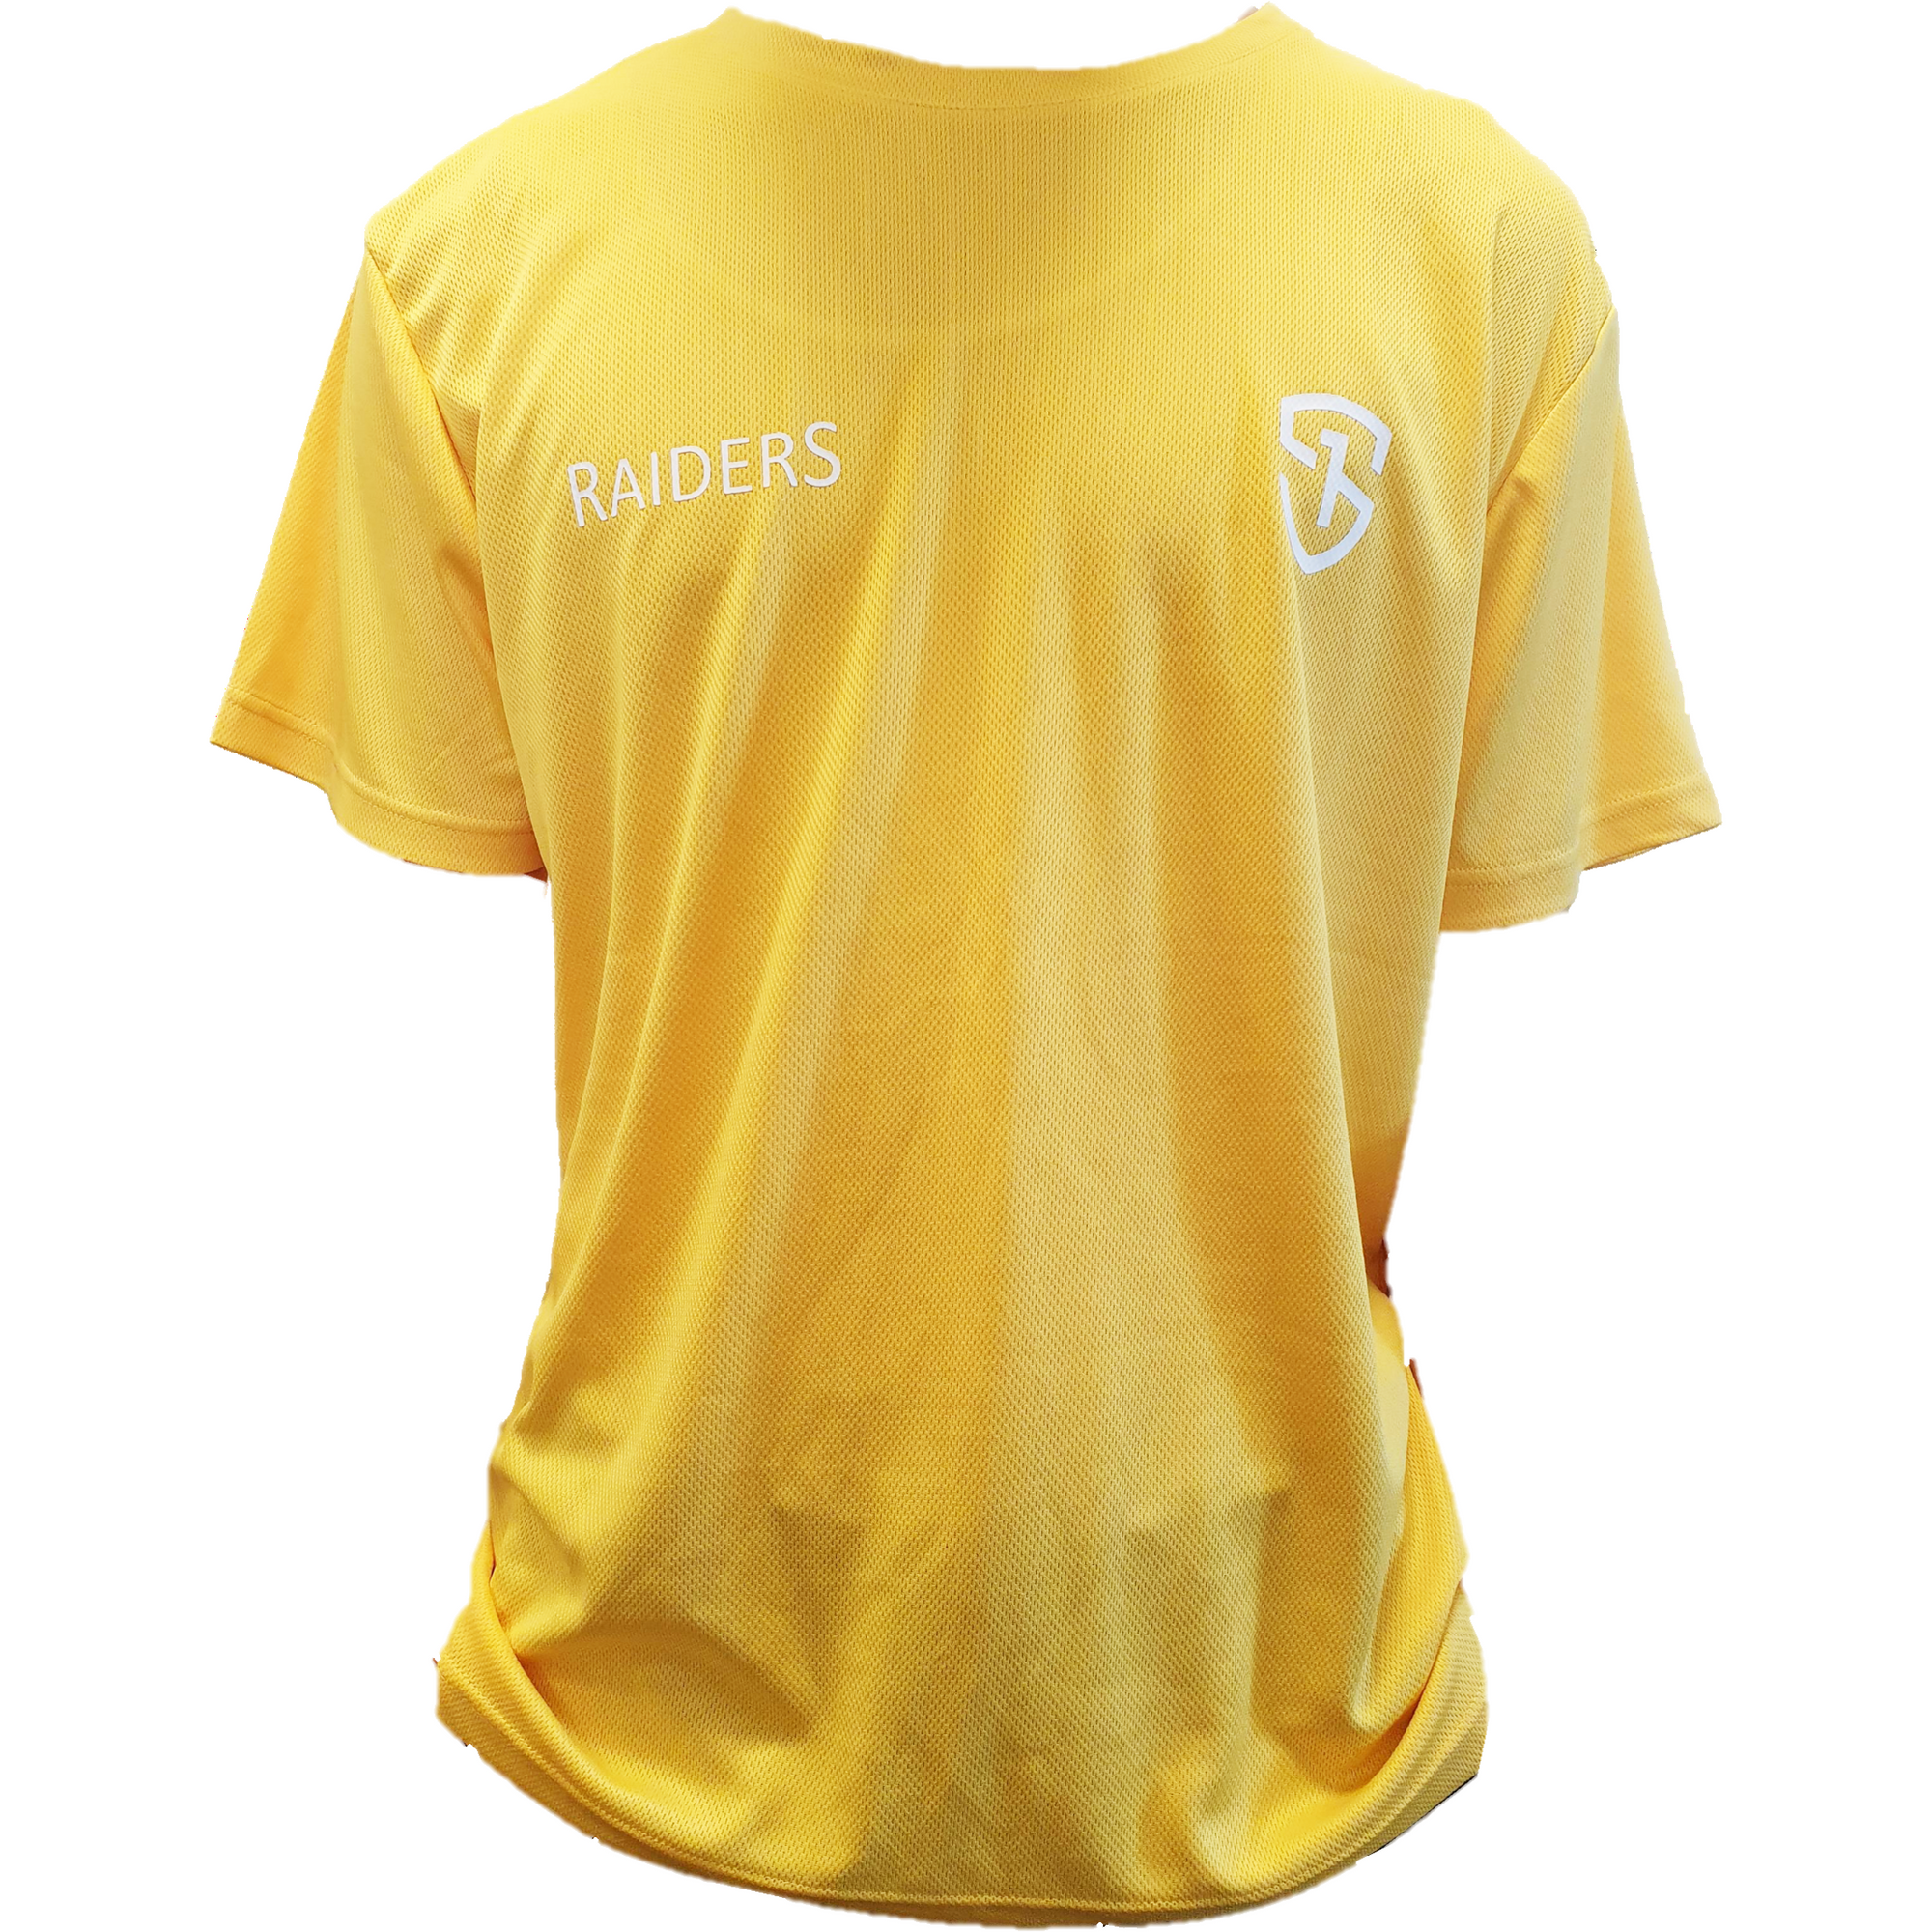 House Team Sports T-shirt Yellow Size 10